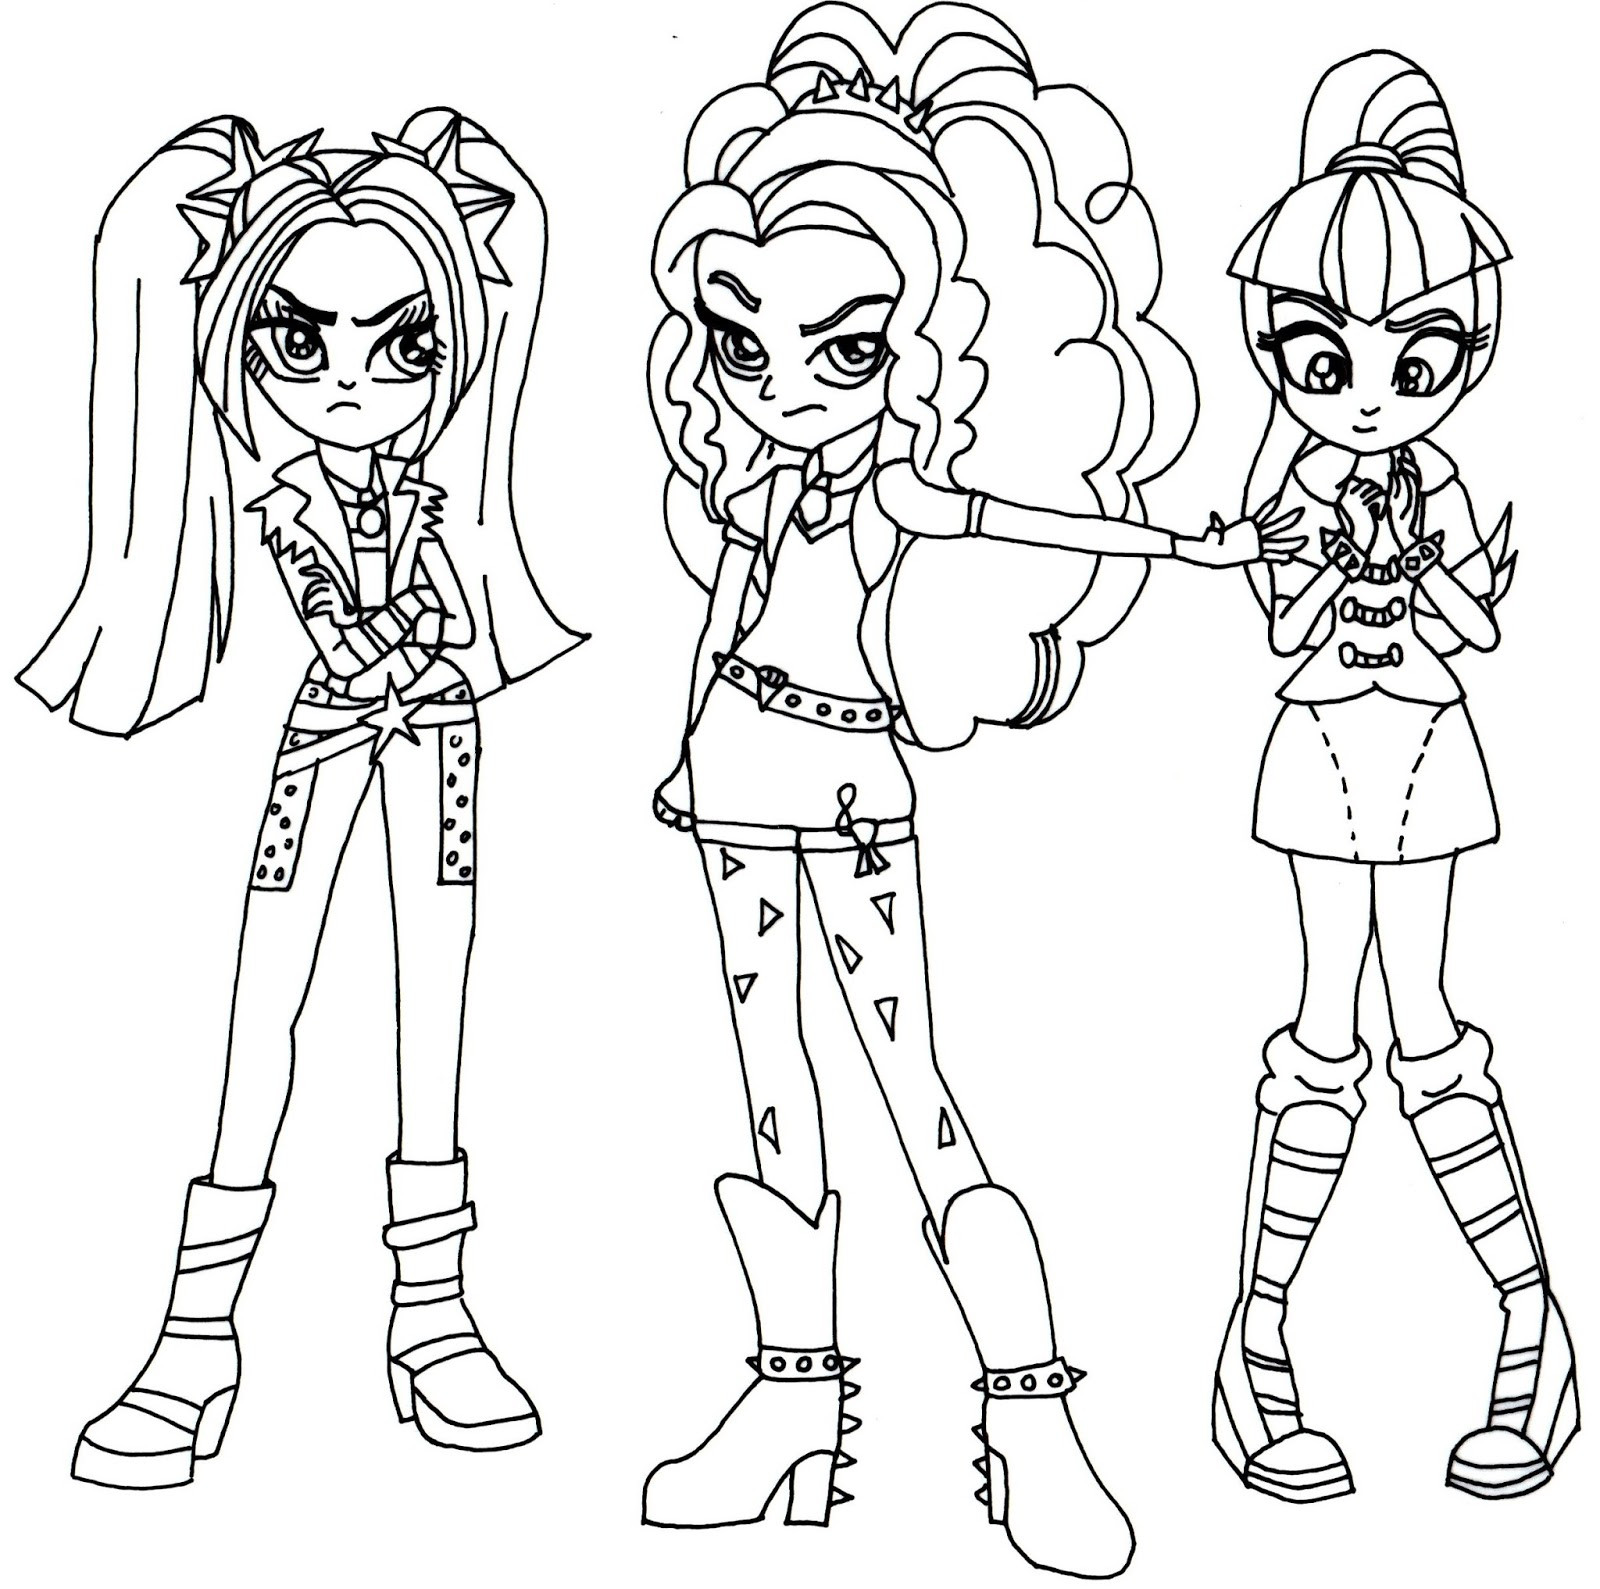 Equestria Girls Coloring Pages
 Free Printable My Little Pony Coloring Pages Villain in